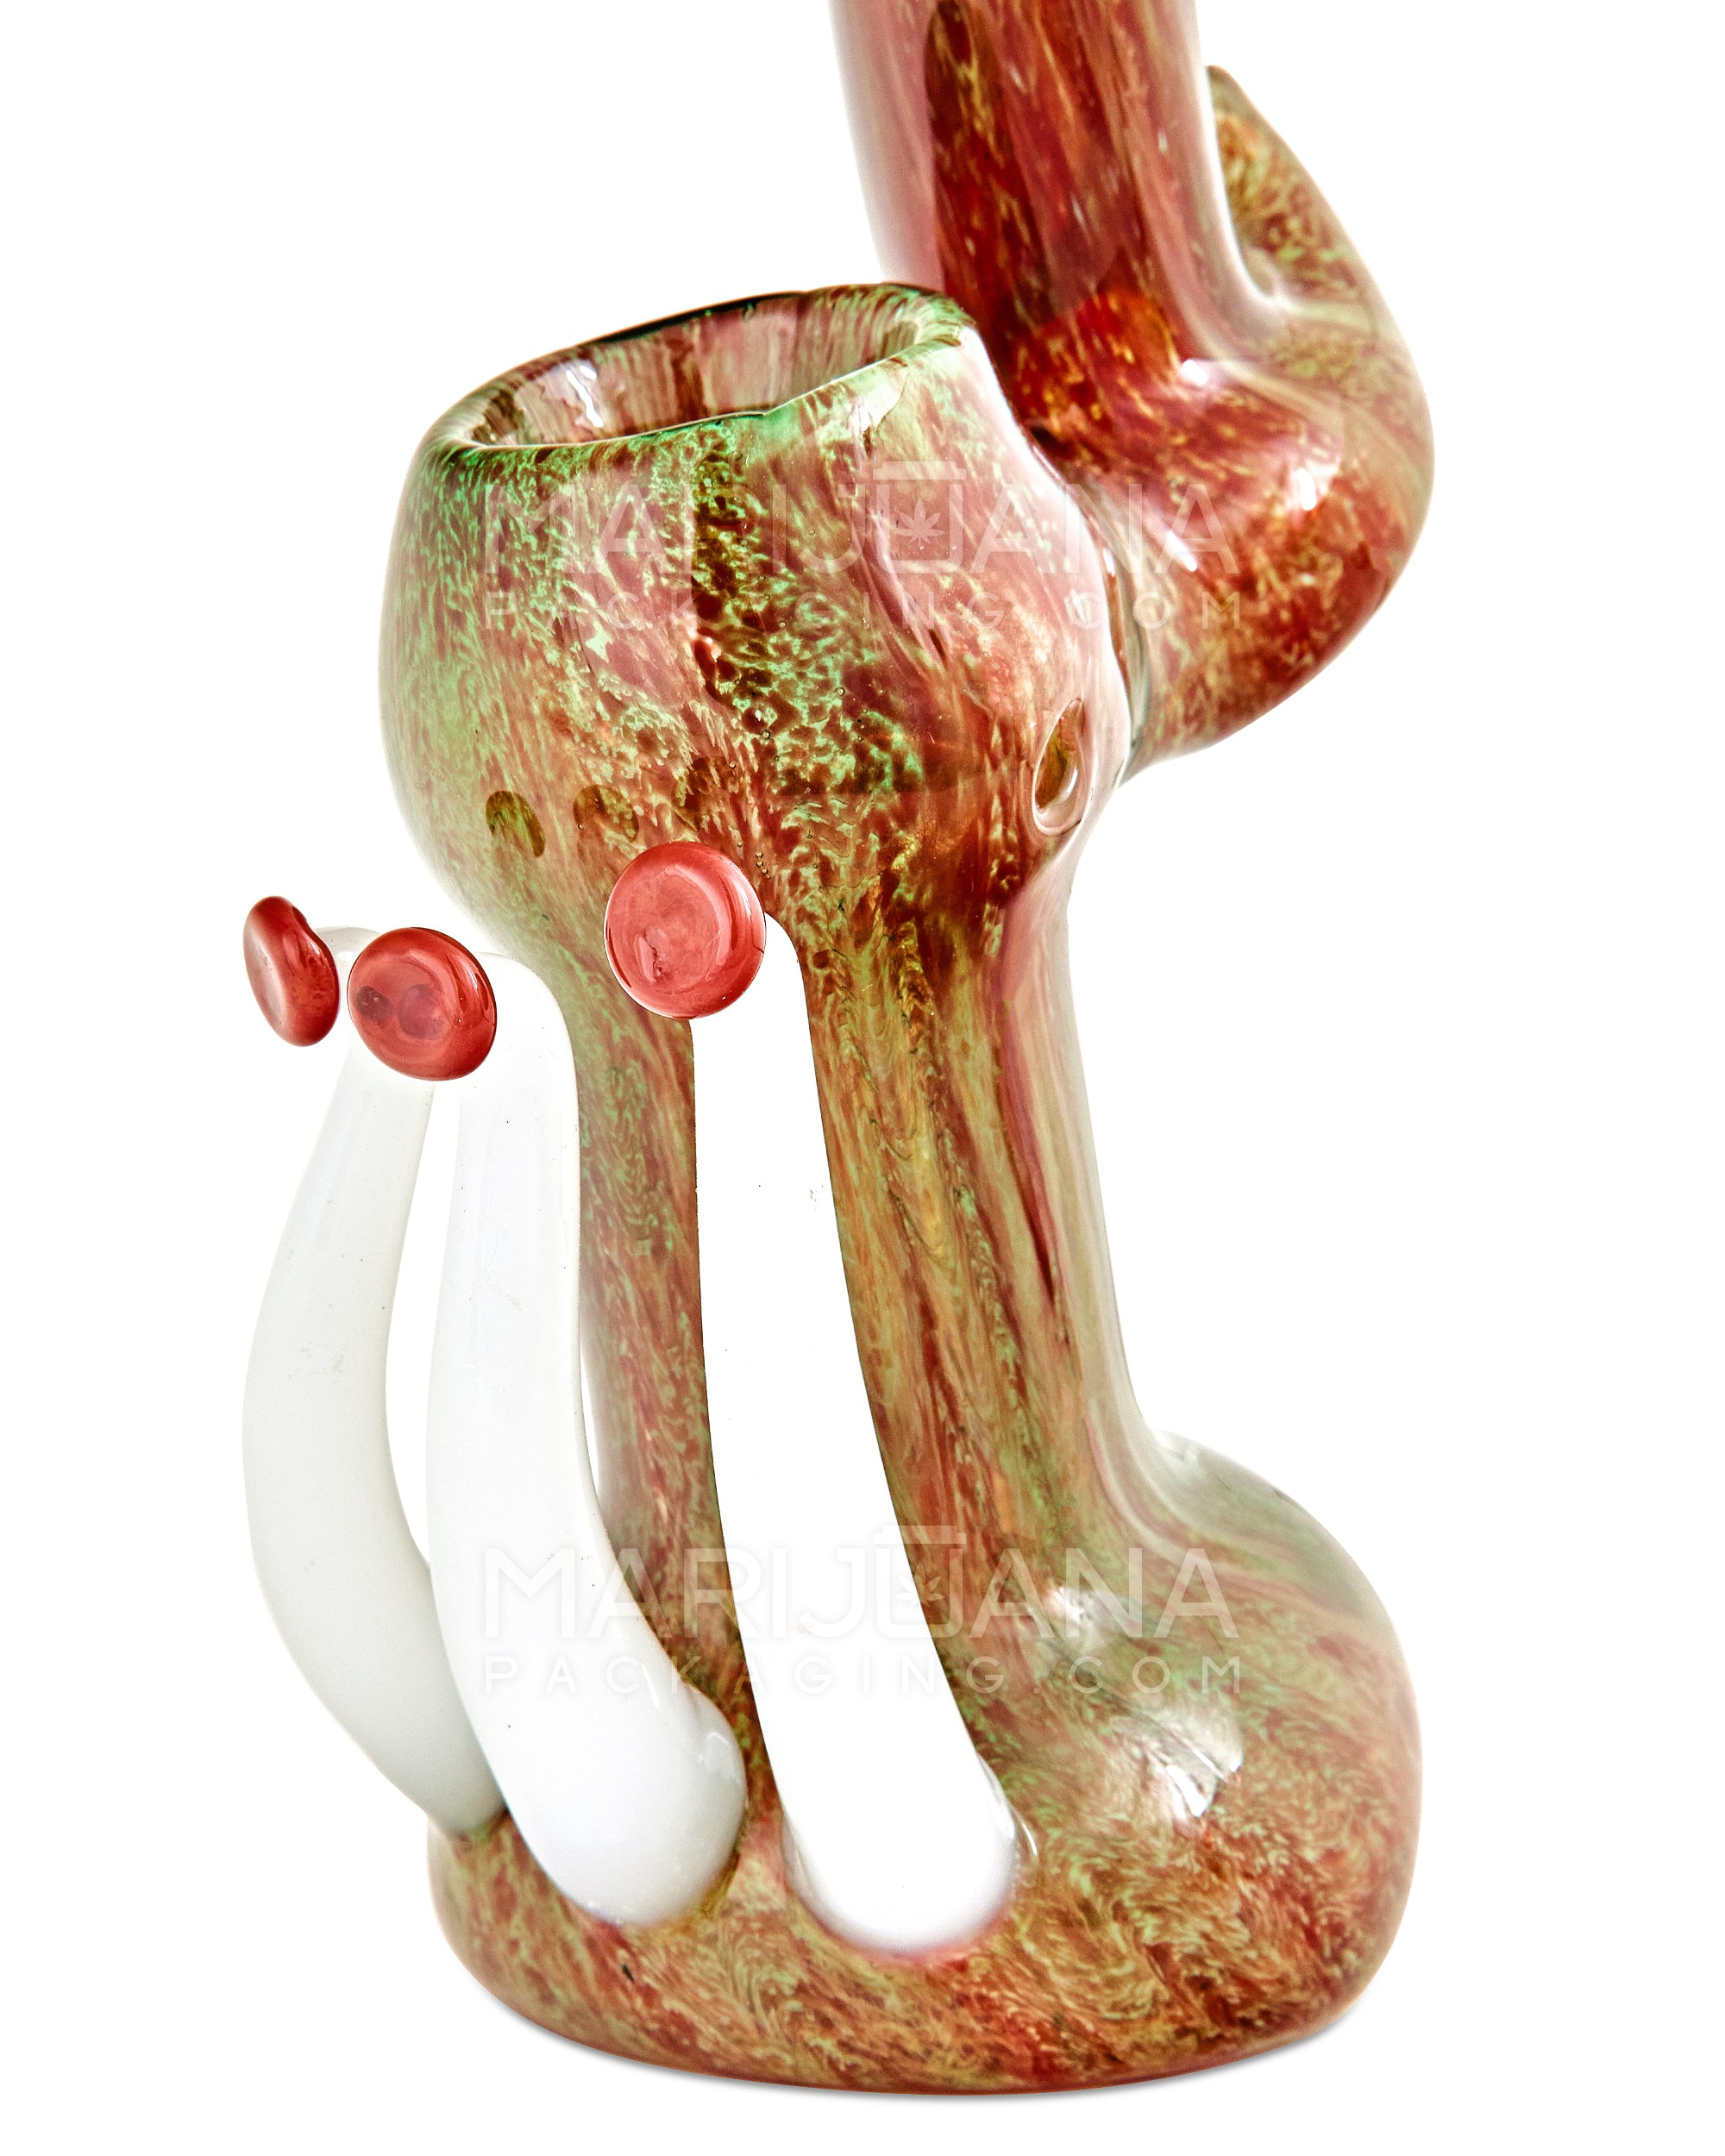 Heady | Donut Mouth Color Pull Kraken Bubbler w/ Triple Tentacles | 9in Tall - Glass - Red & Green - 12